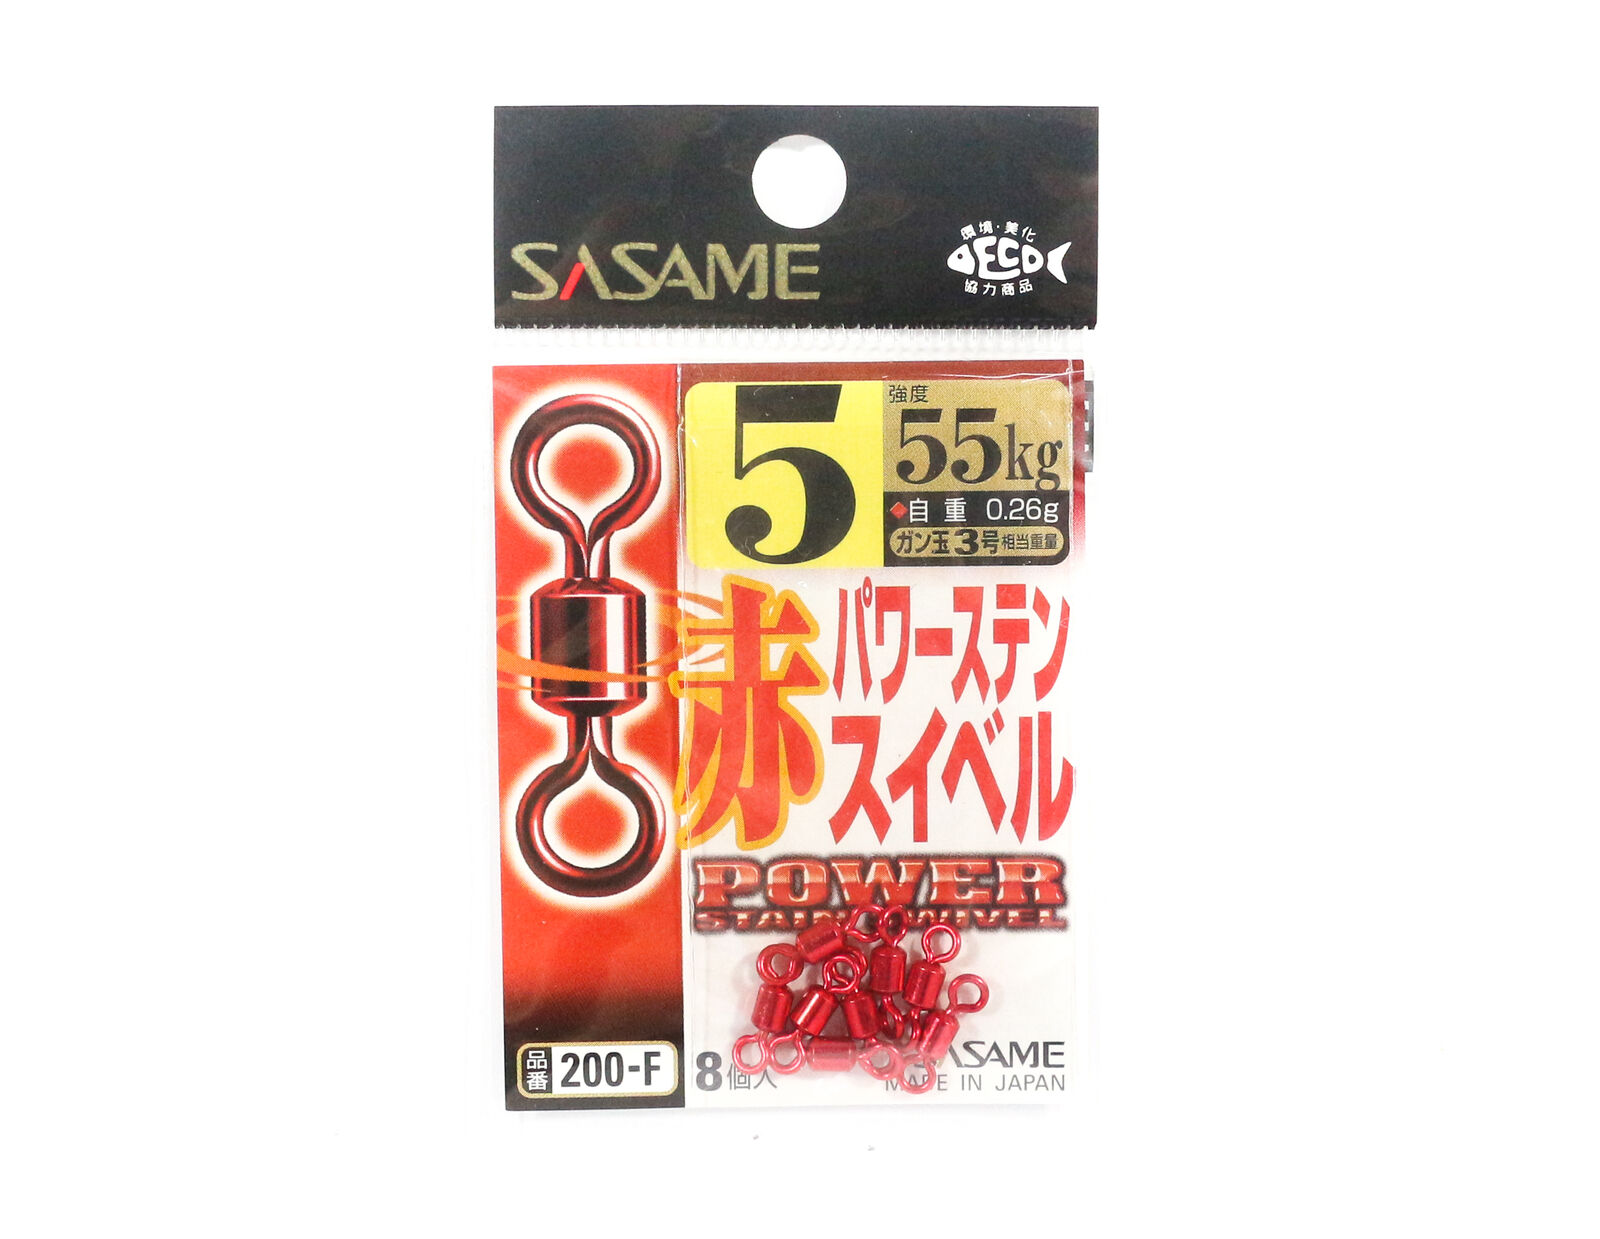 Sasame 200-F Los Angeles Colorado Springs Mall Mall Power Stain Swivel Smooth Spin Size Red 4853 5